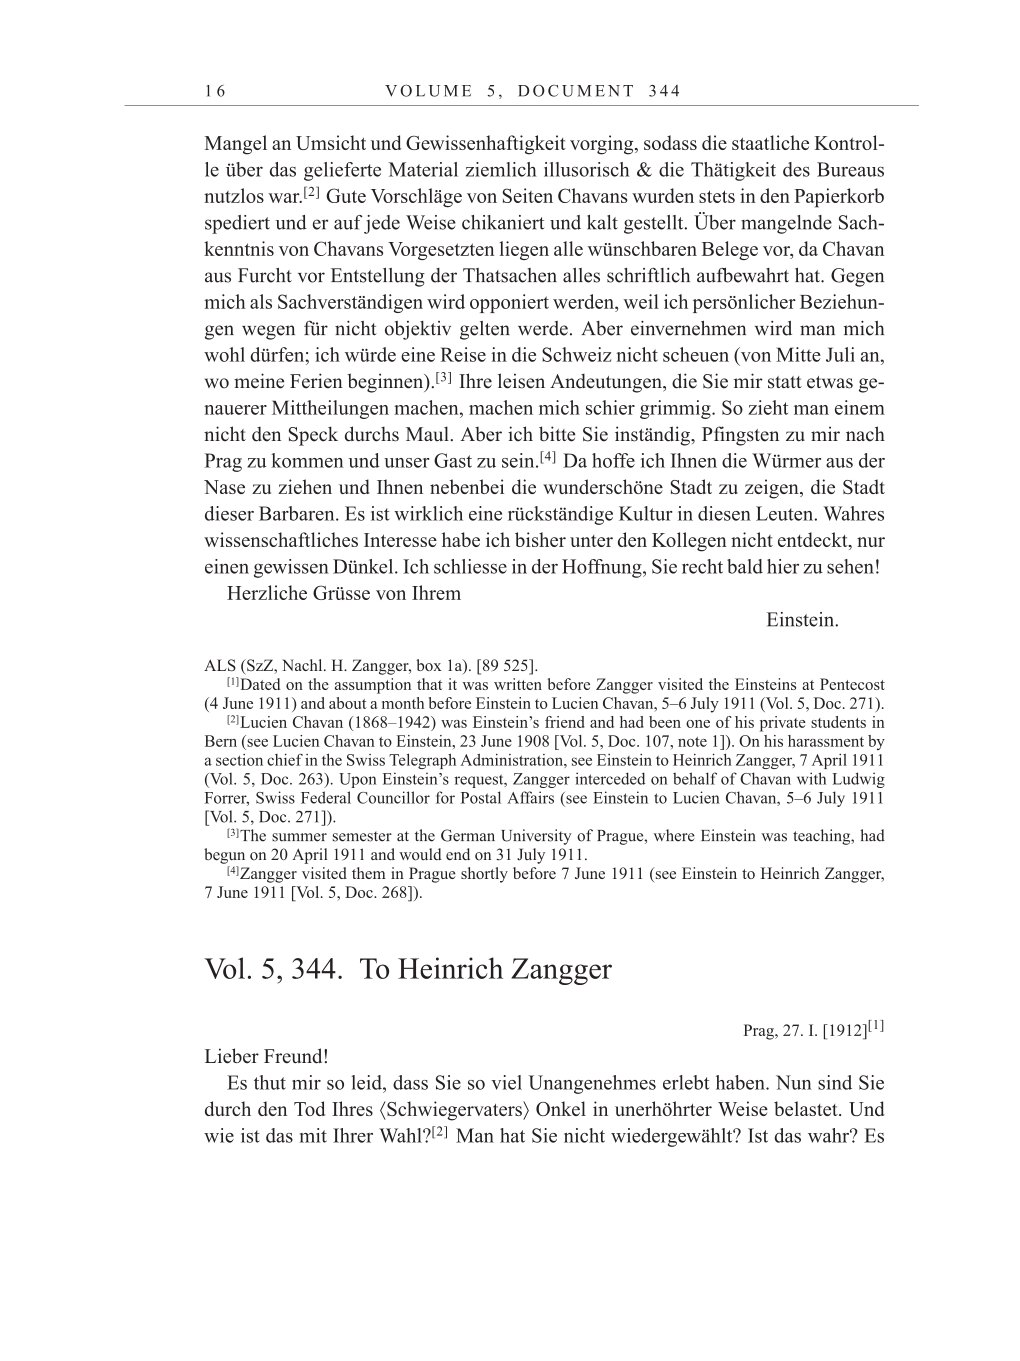 Volume 10: The Berlin Years: Correspondence May-December 1920 / Supplementary Correspondence 1909-1920 page 16